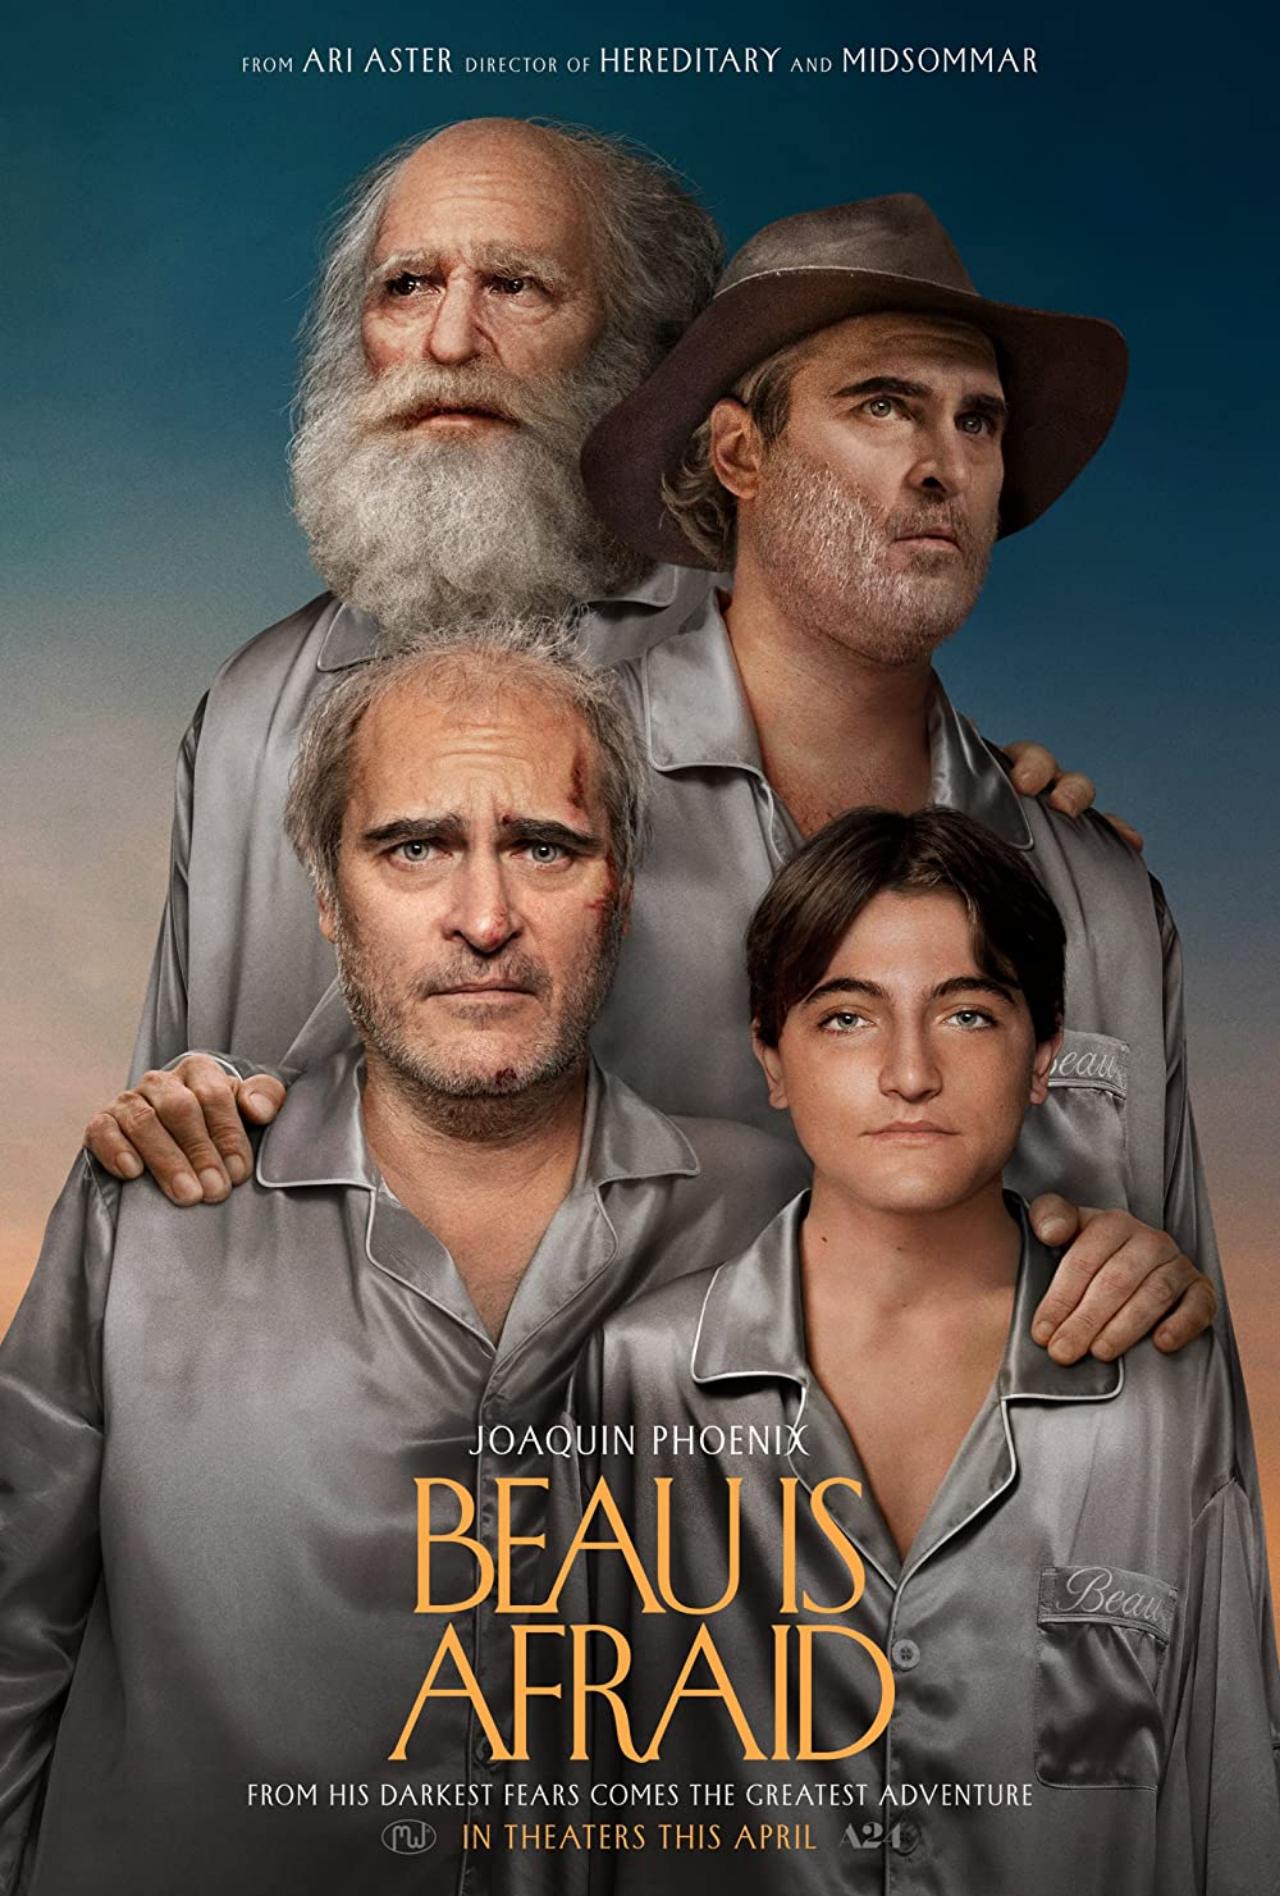 Beau is Afraid: This film is an amalgamation of horror, comedy and adventure but can’t be defined under one genre. It can, however, be defined as mind-blowing! Starring Joaquin Phoenix, the film follows a man who must get back home all the while living through his darkest fears. We’d say, just go with the flow and don’t try too hard to unravel the highly complex plot. After all, it’s directed by the famed Director of 'Midsummer' and 'Hereditary', Ari Aster. The film is slated to release on May 12.